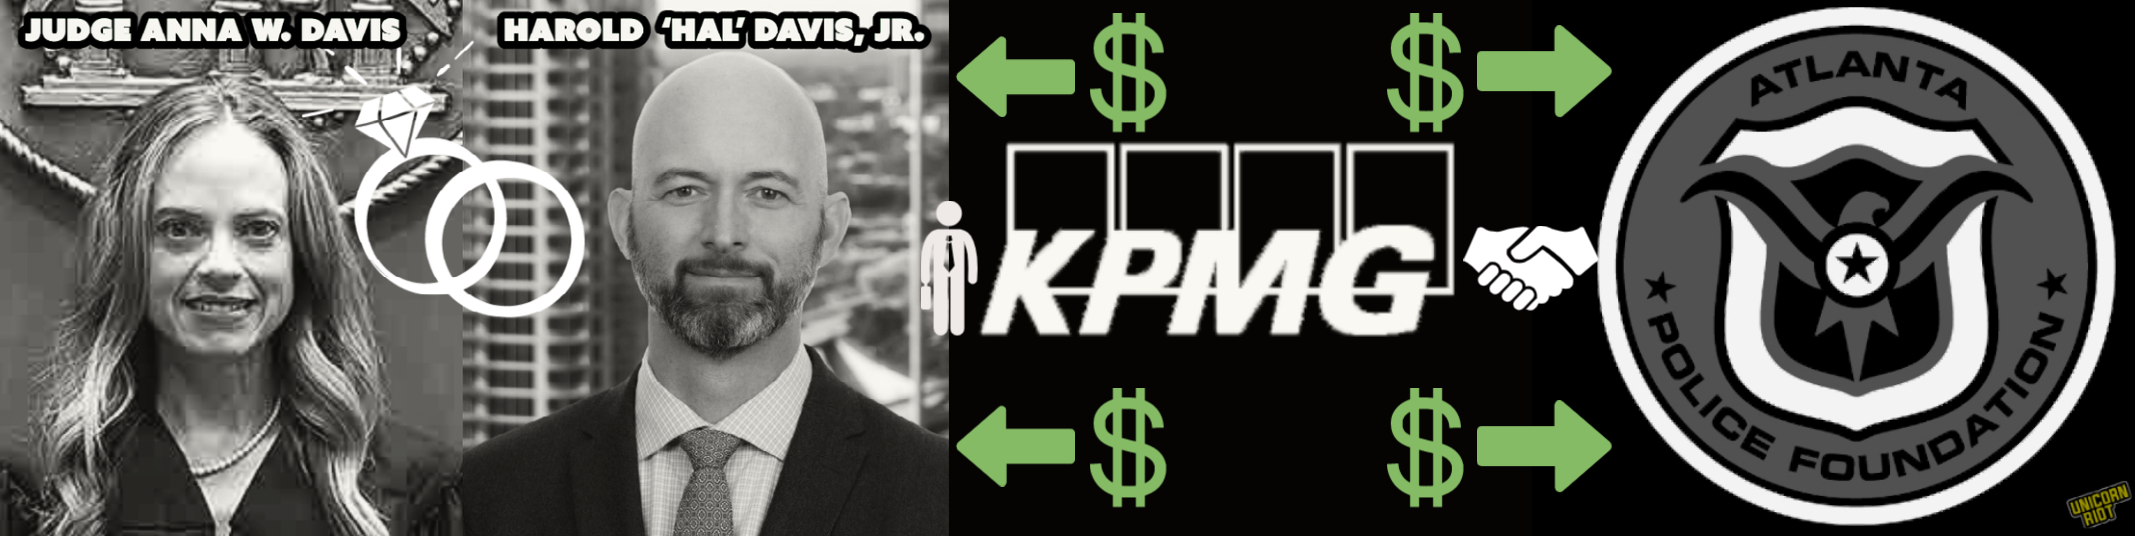 An infographic shows Judge Anna W. Davis's marriage to KPMG attorney Harold Davis, Jr. with a marriage rings symbol overlapping between their two images. Money symbols and arrows then indicate how the KPMG firm is paying both Mr. Davis and the Atlanta Police Foundation. 